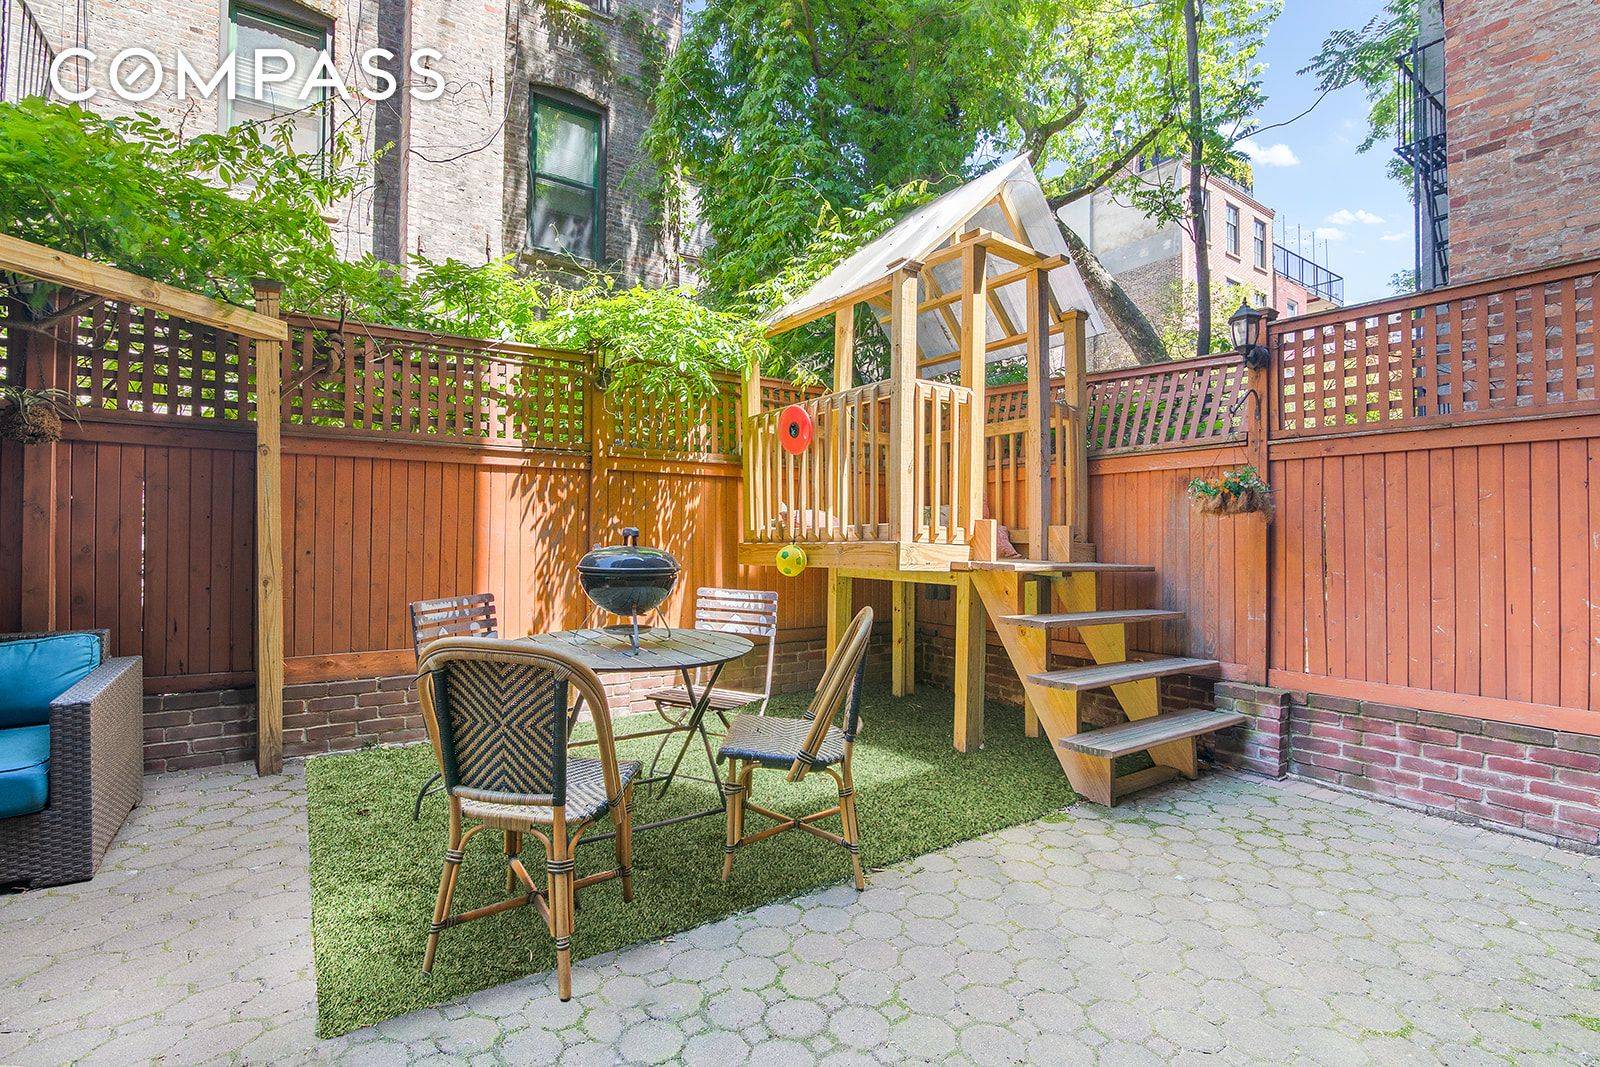 GORGEOUS YARD, 5 BEDS amp ; 4 FULL BATHS Live on idyllic West 11th in a true spacious stunner.